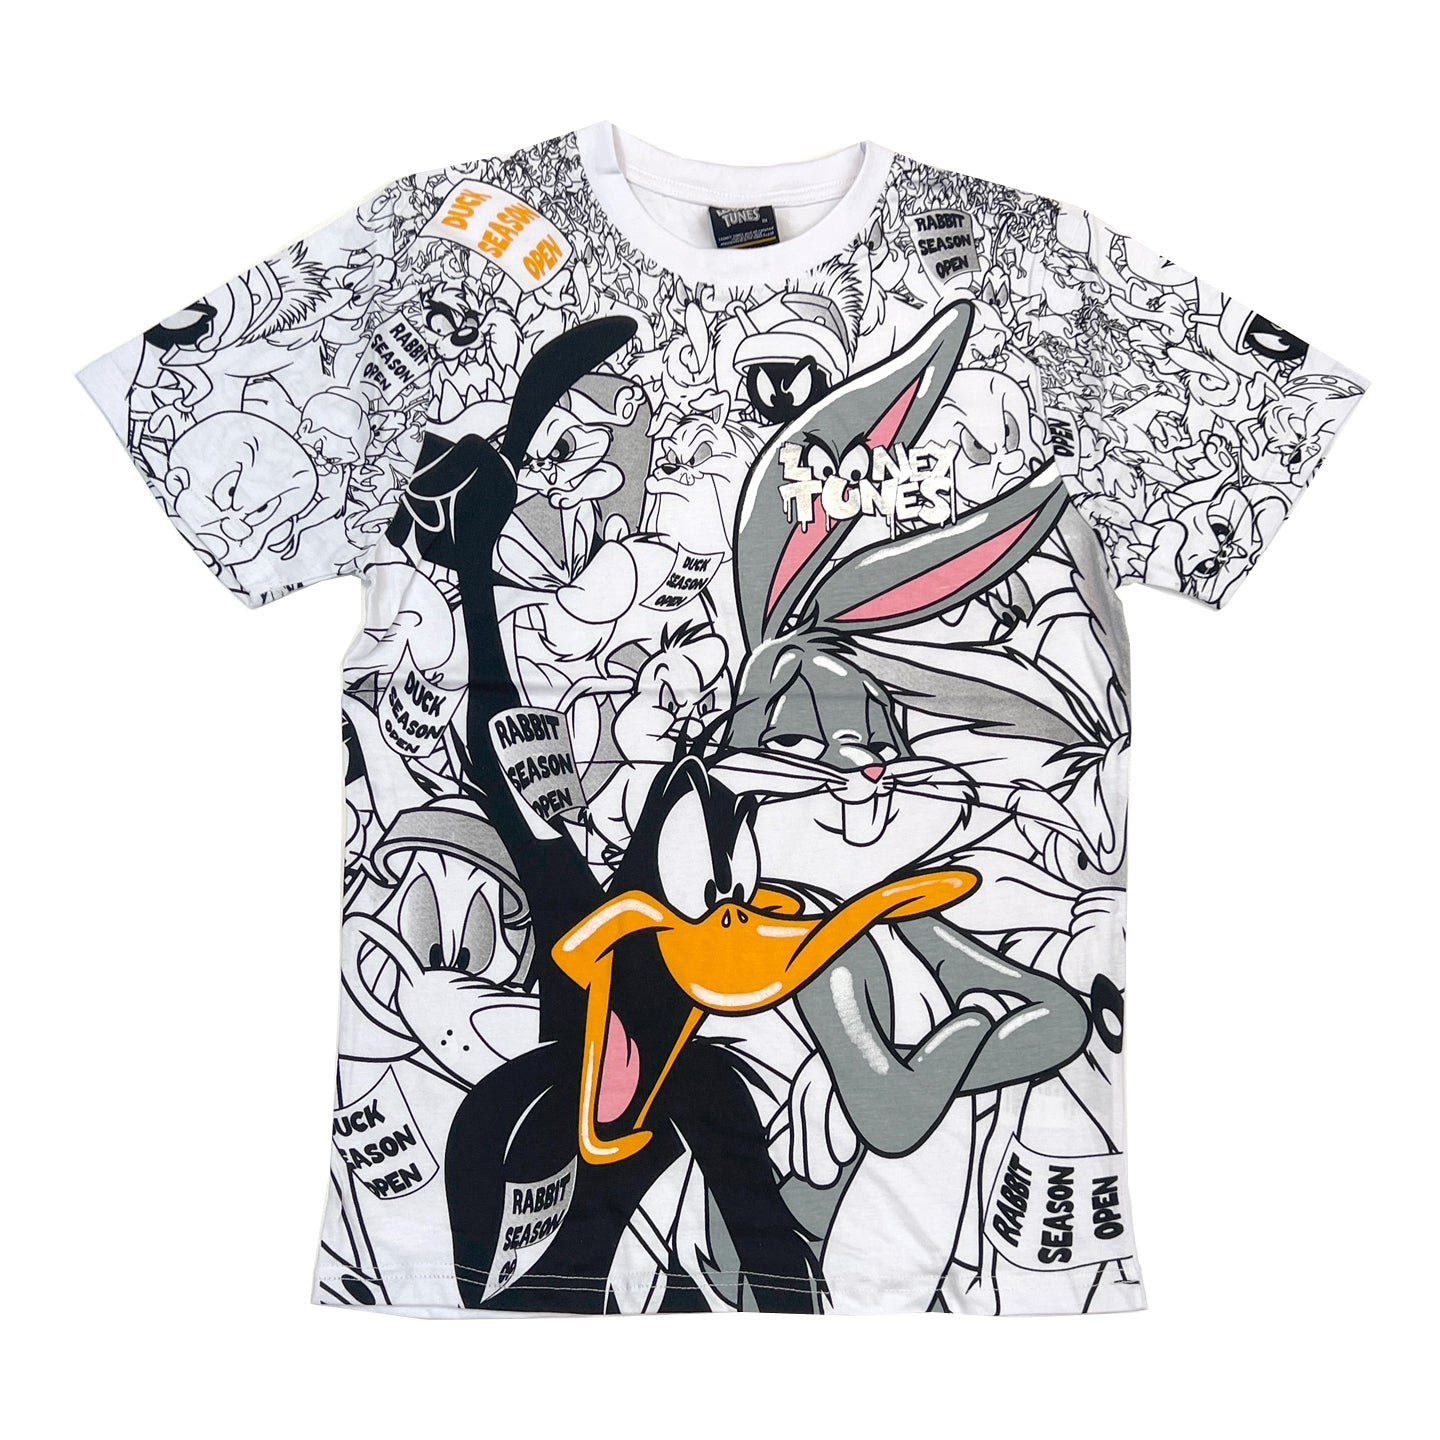 for & (White) / Bunny Bugs $30 $16.99 Looney Tunes 2 Daffy Tee